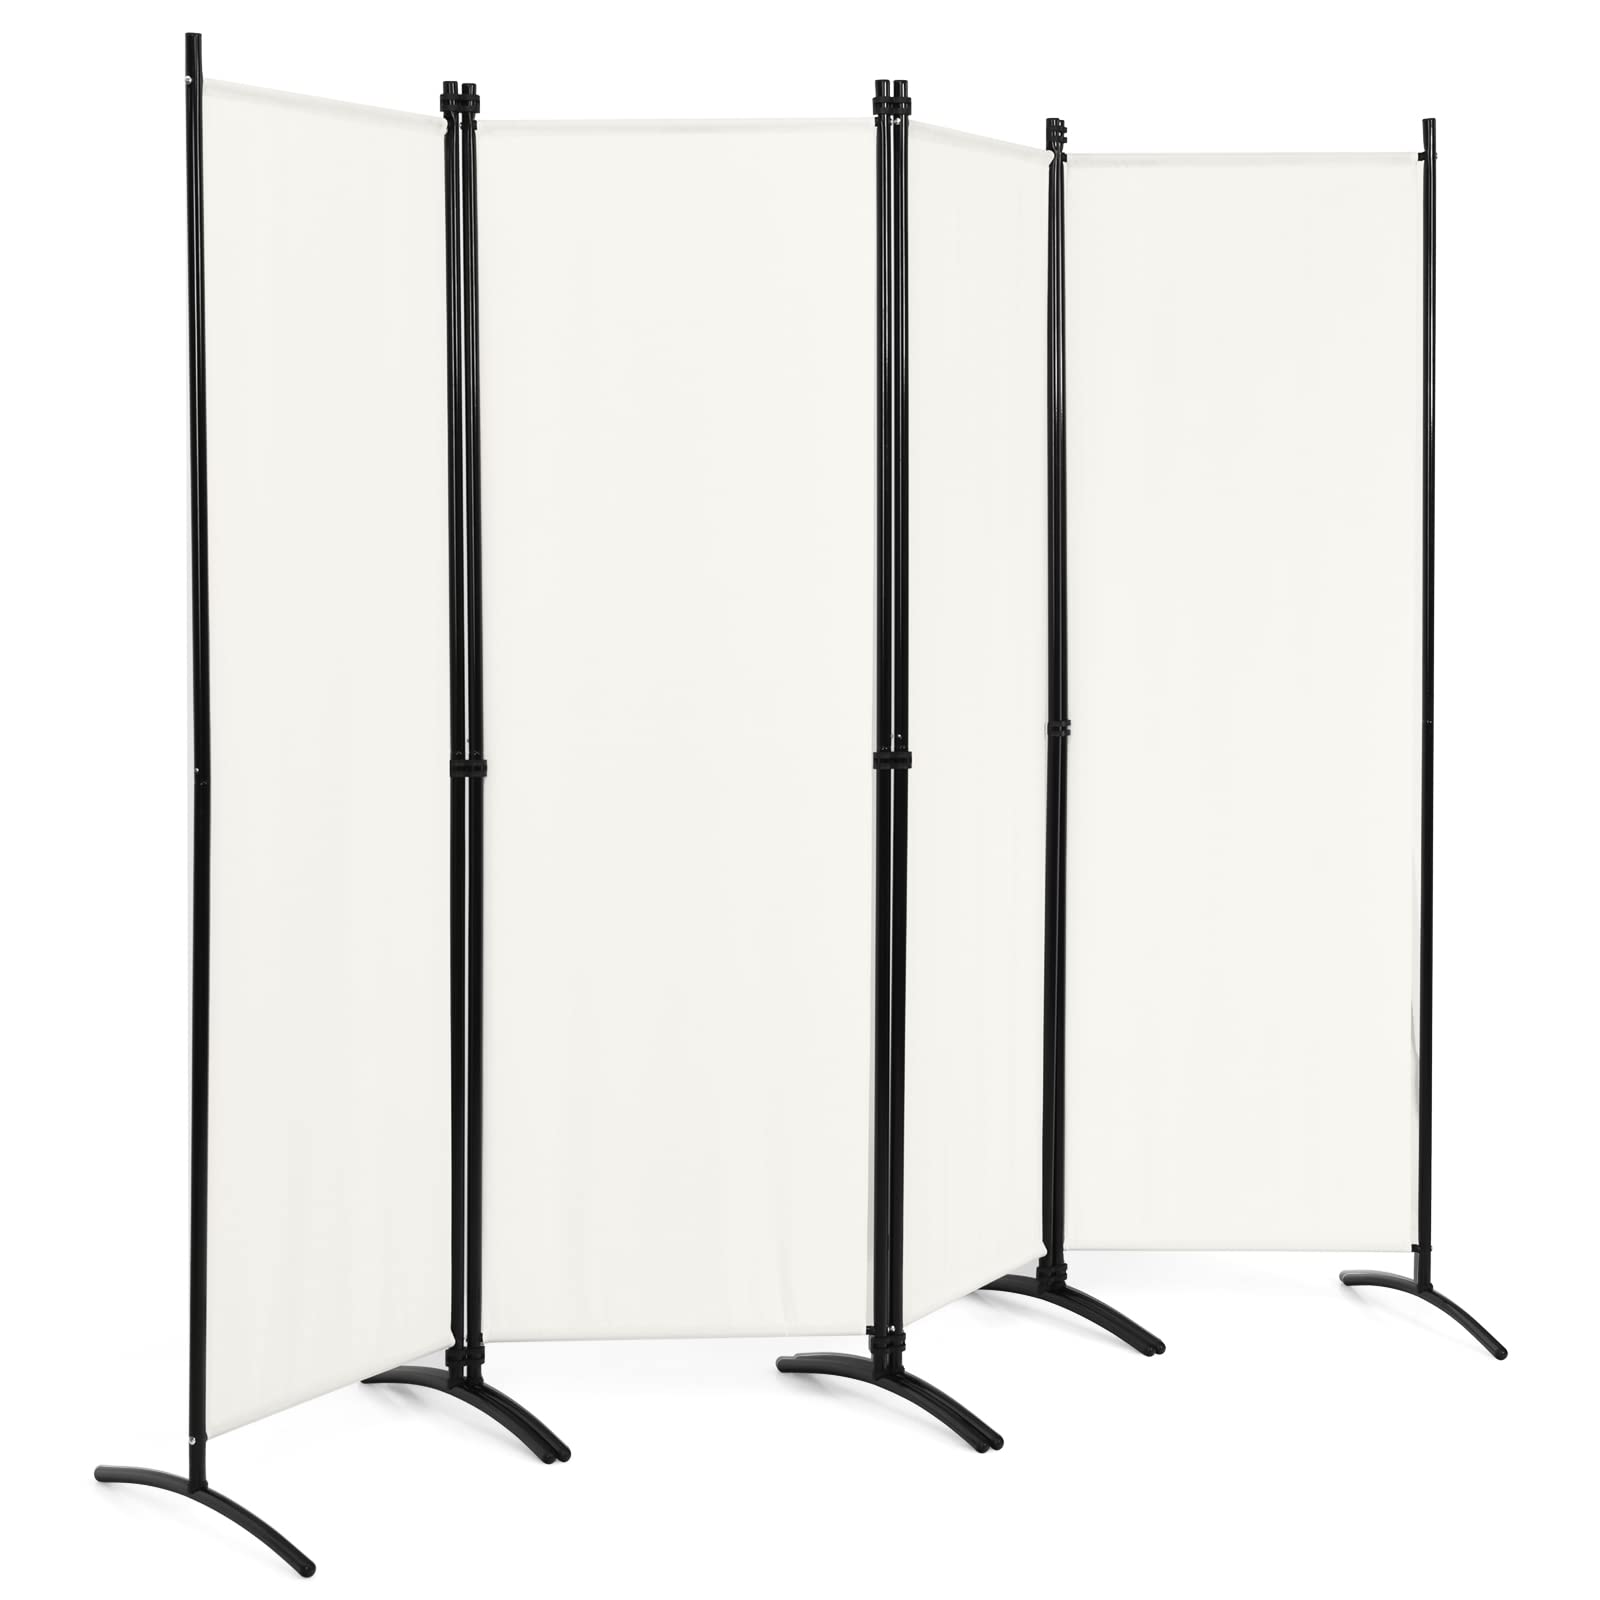 Giantex 4 Panel Room Divider, 5.6Ft Folding Screen, Home Office Freestanding Tall Partition